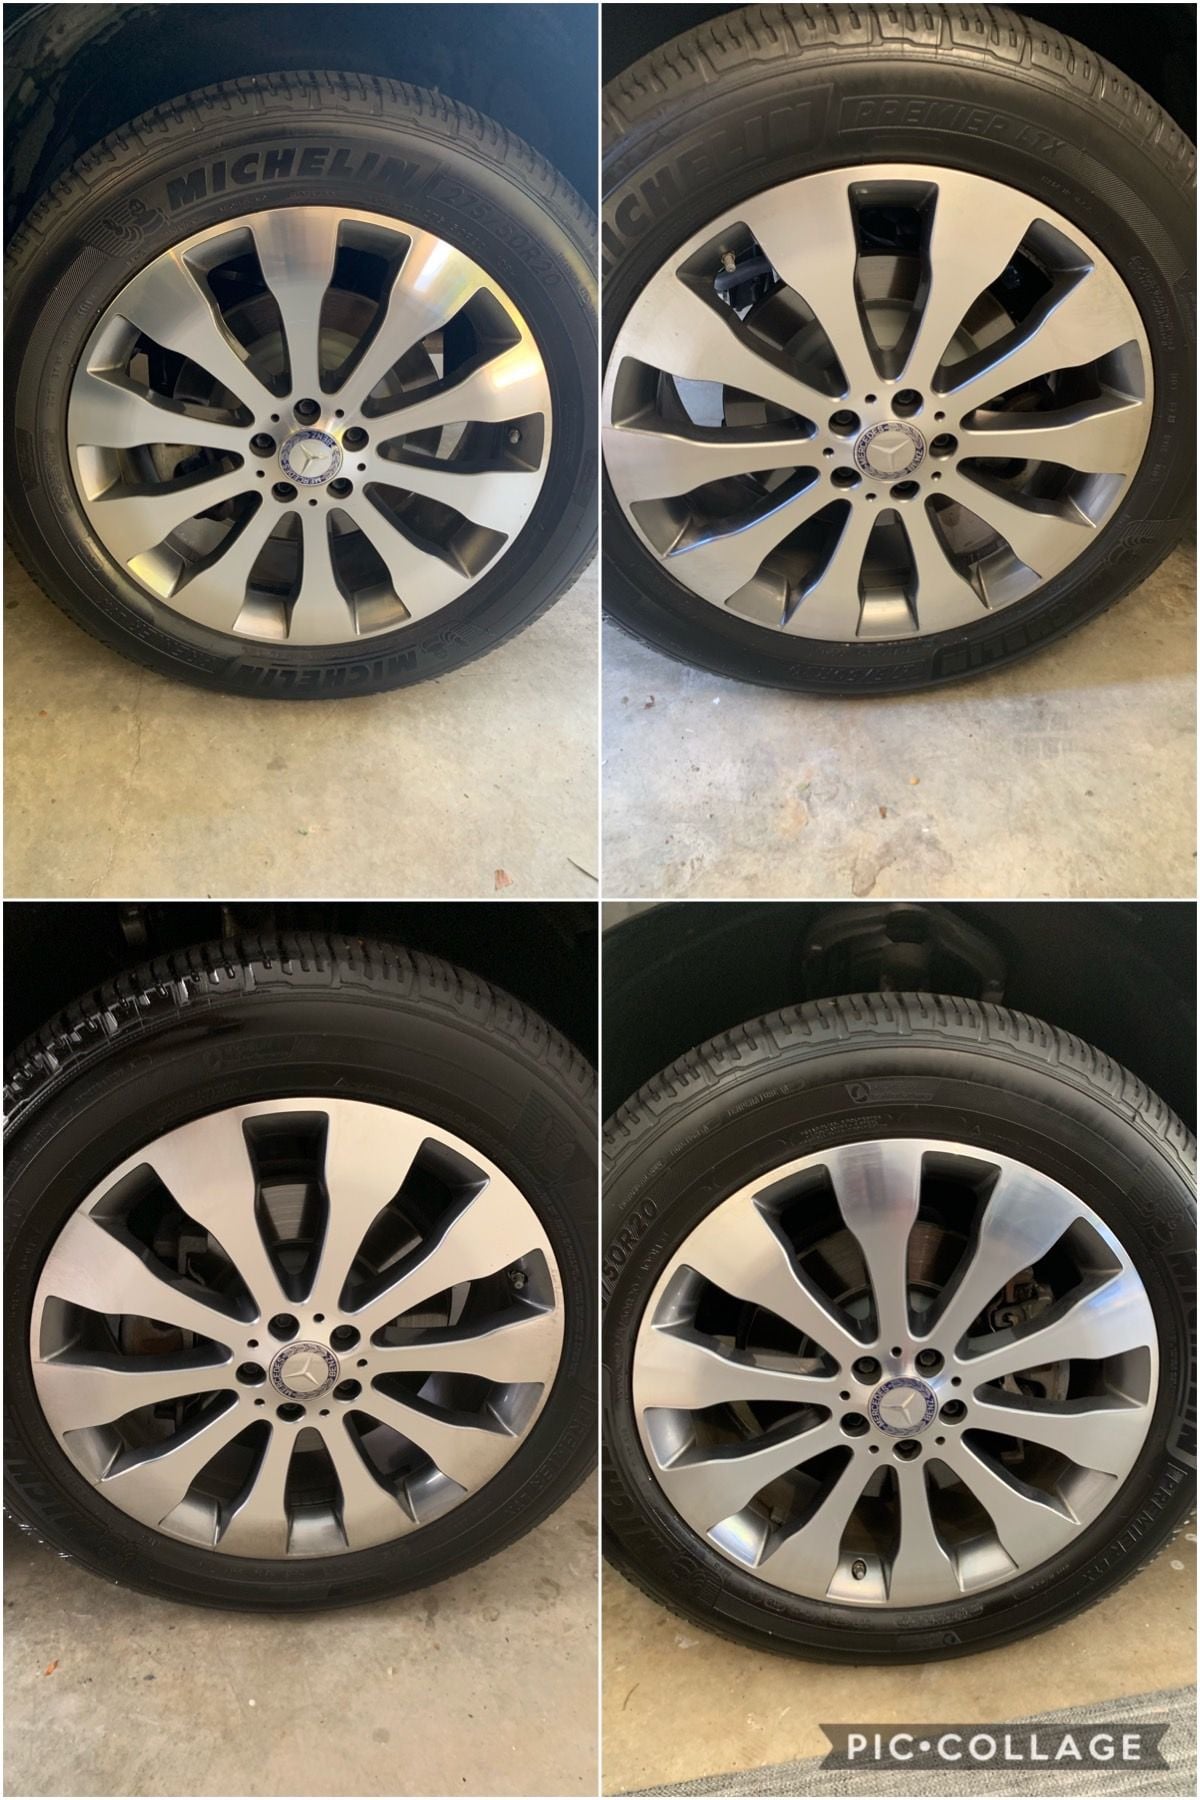 Wheels and Tires/Axles - like new 2017 gls450 rims - Used - 2017 Mercedes-Benz GLS450 - Mclean, VA 22101, United States